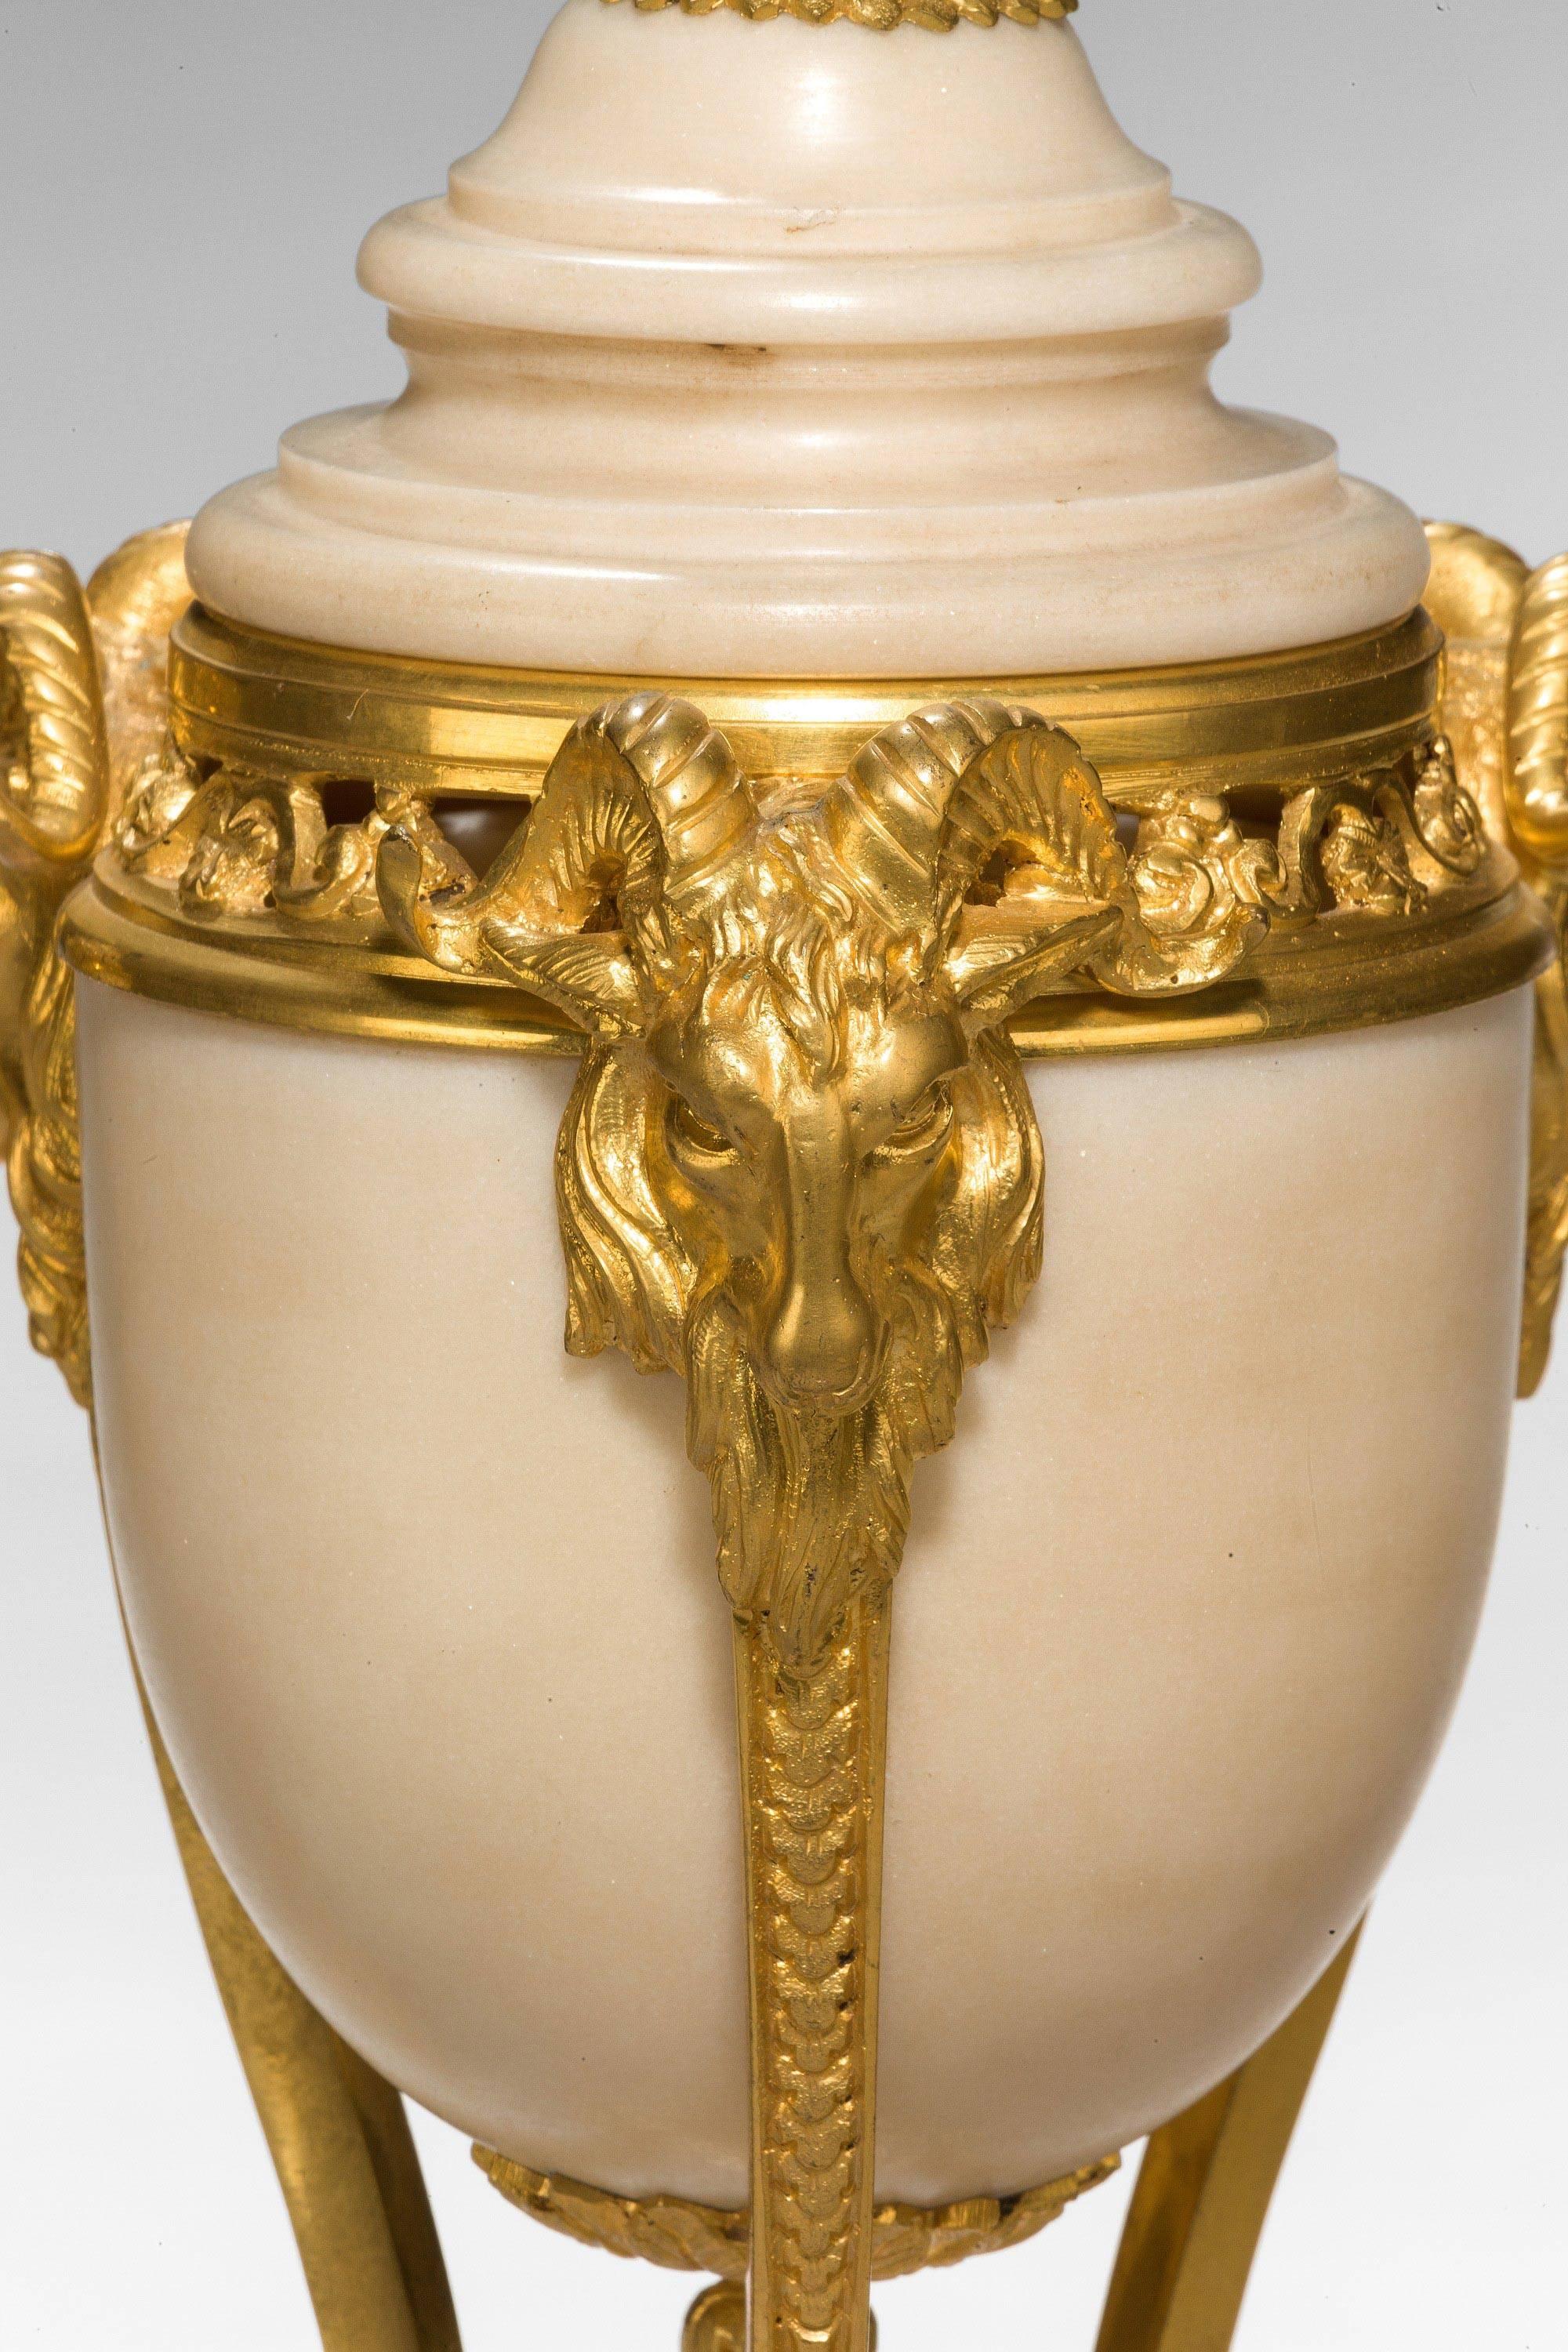 Great Britain (UK) Pair of Early 20th Century French Gilt Bronze and Marble Lidded Vases